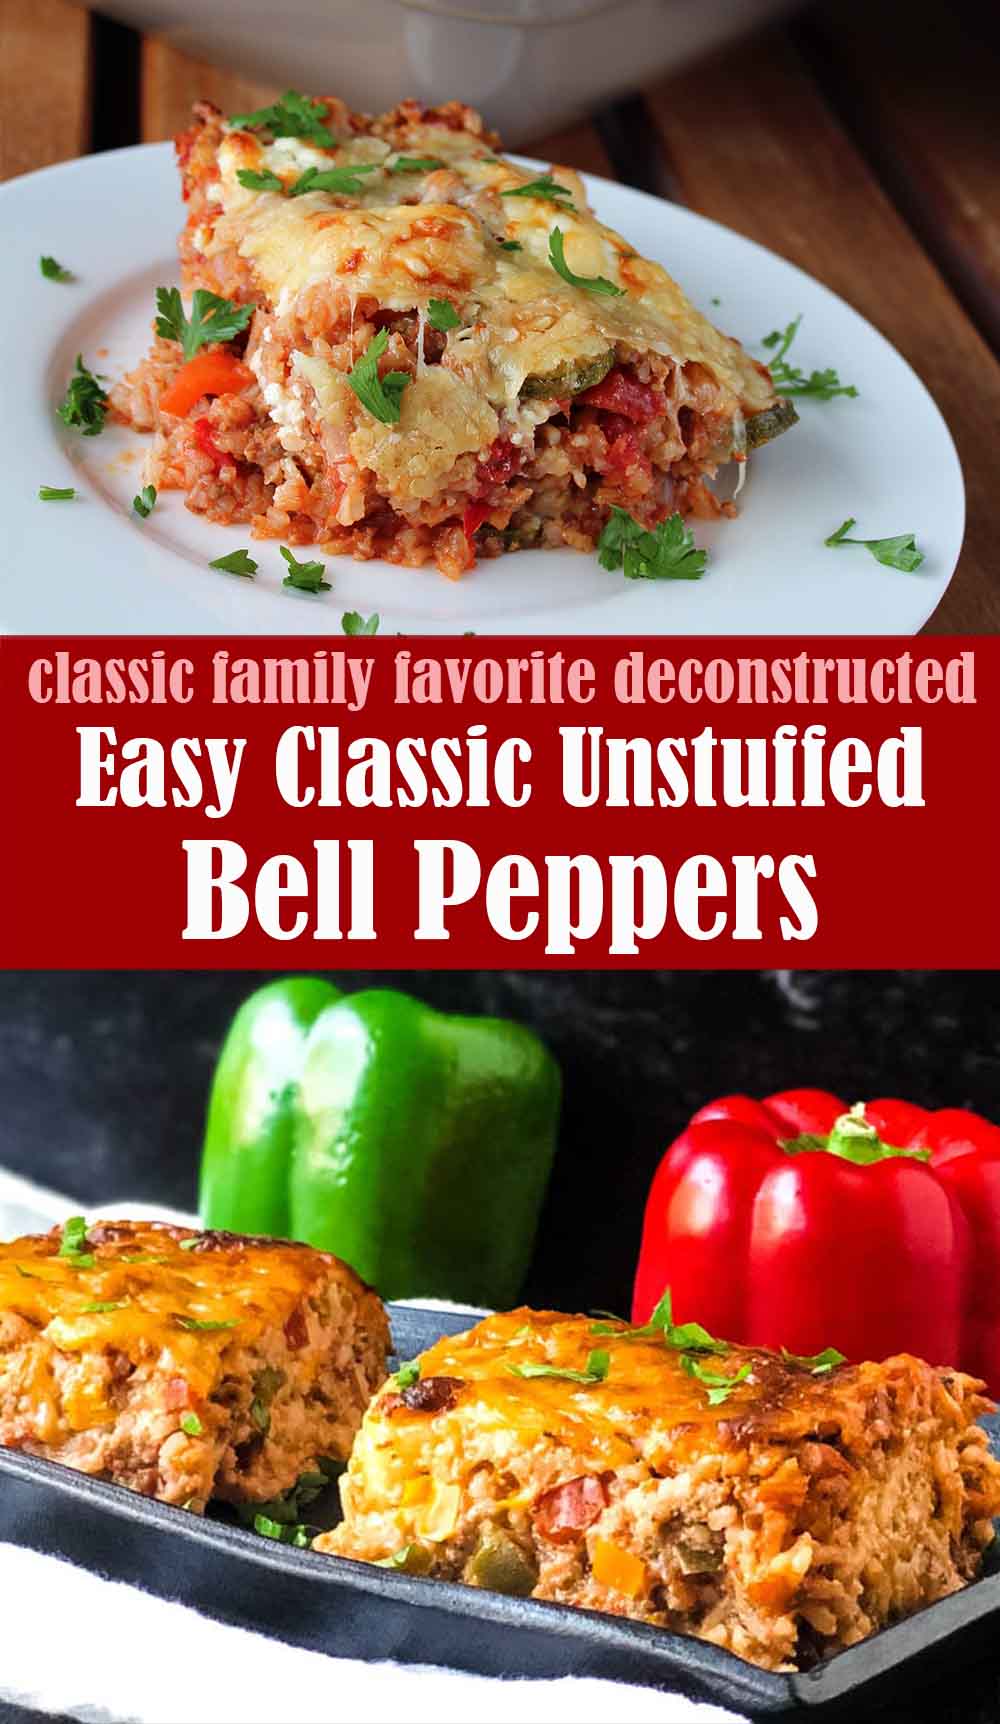 Easy Classic Unstuffed Bell Peppers